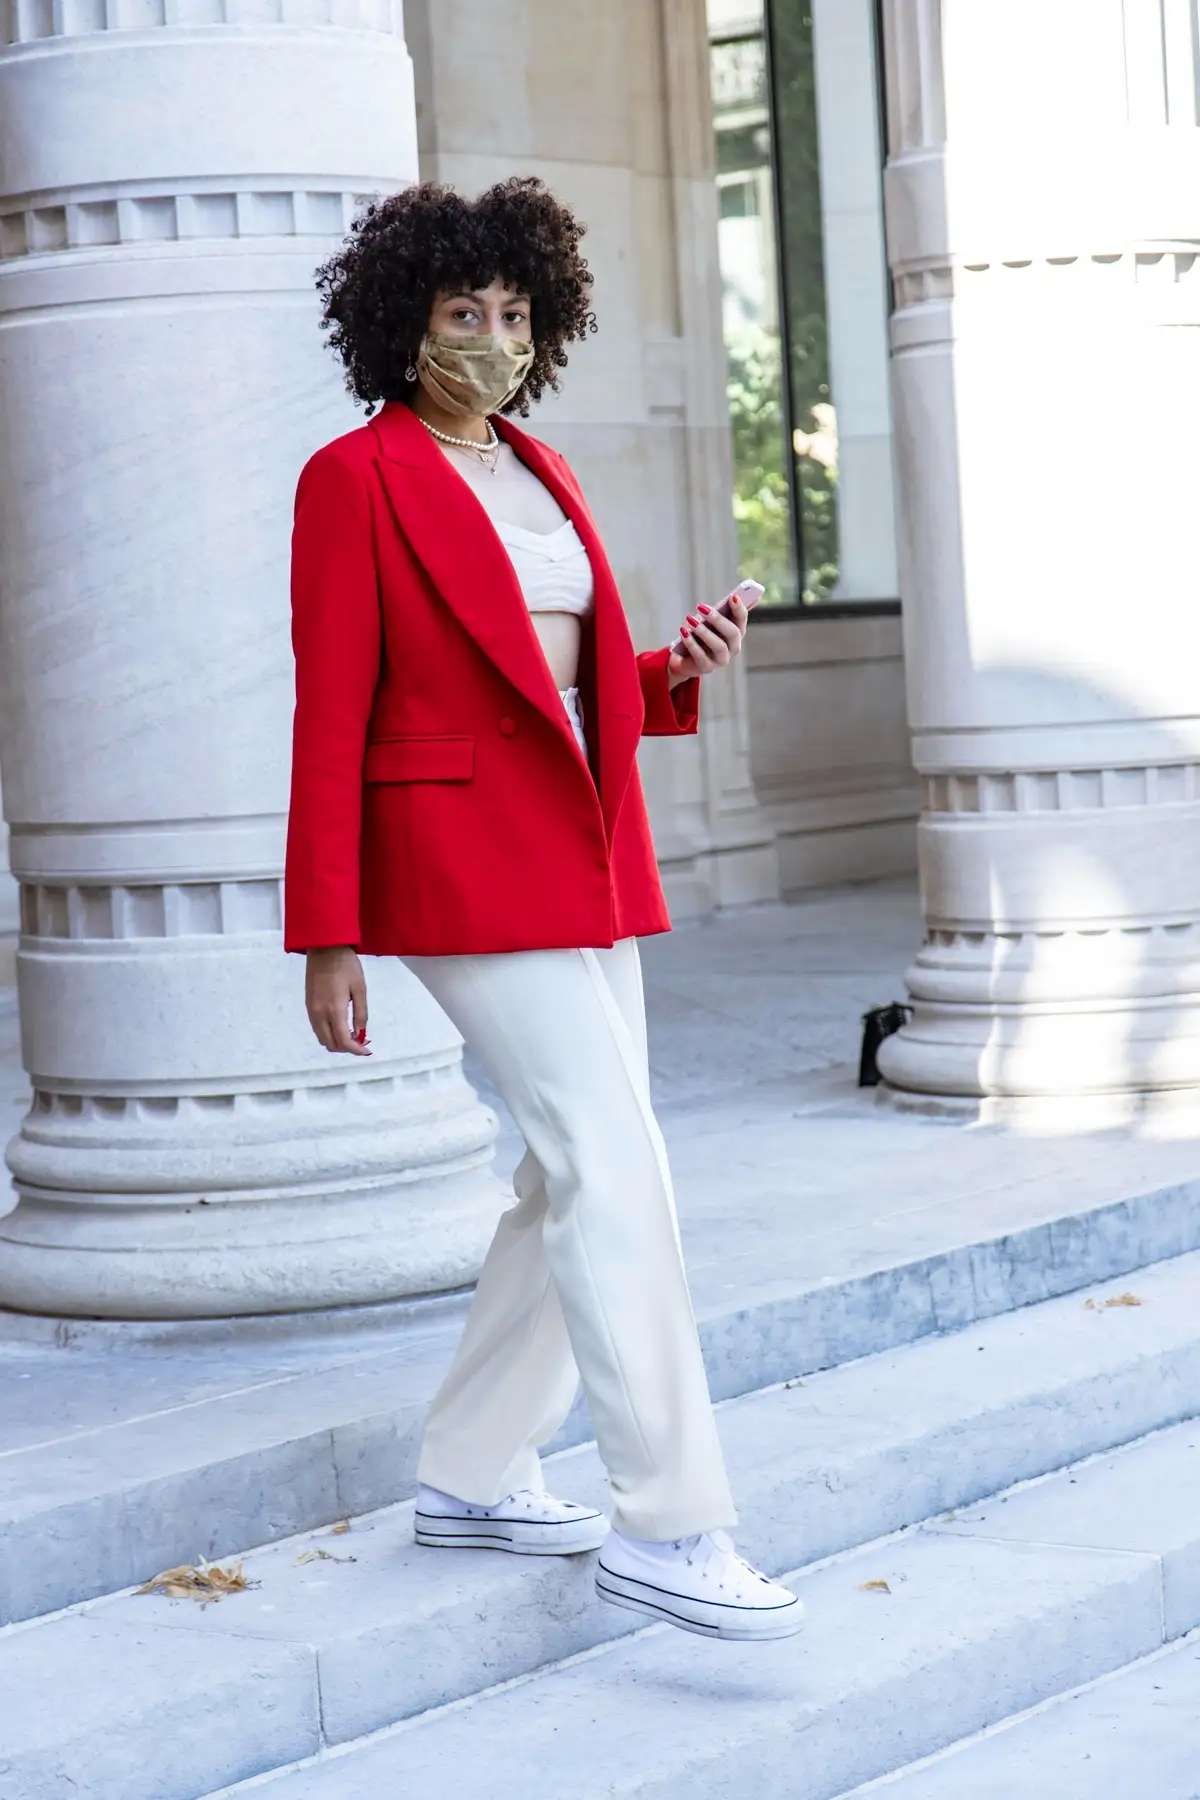 white pants chucks and red blazer outfit